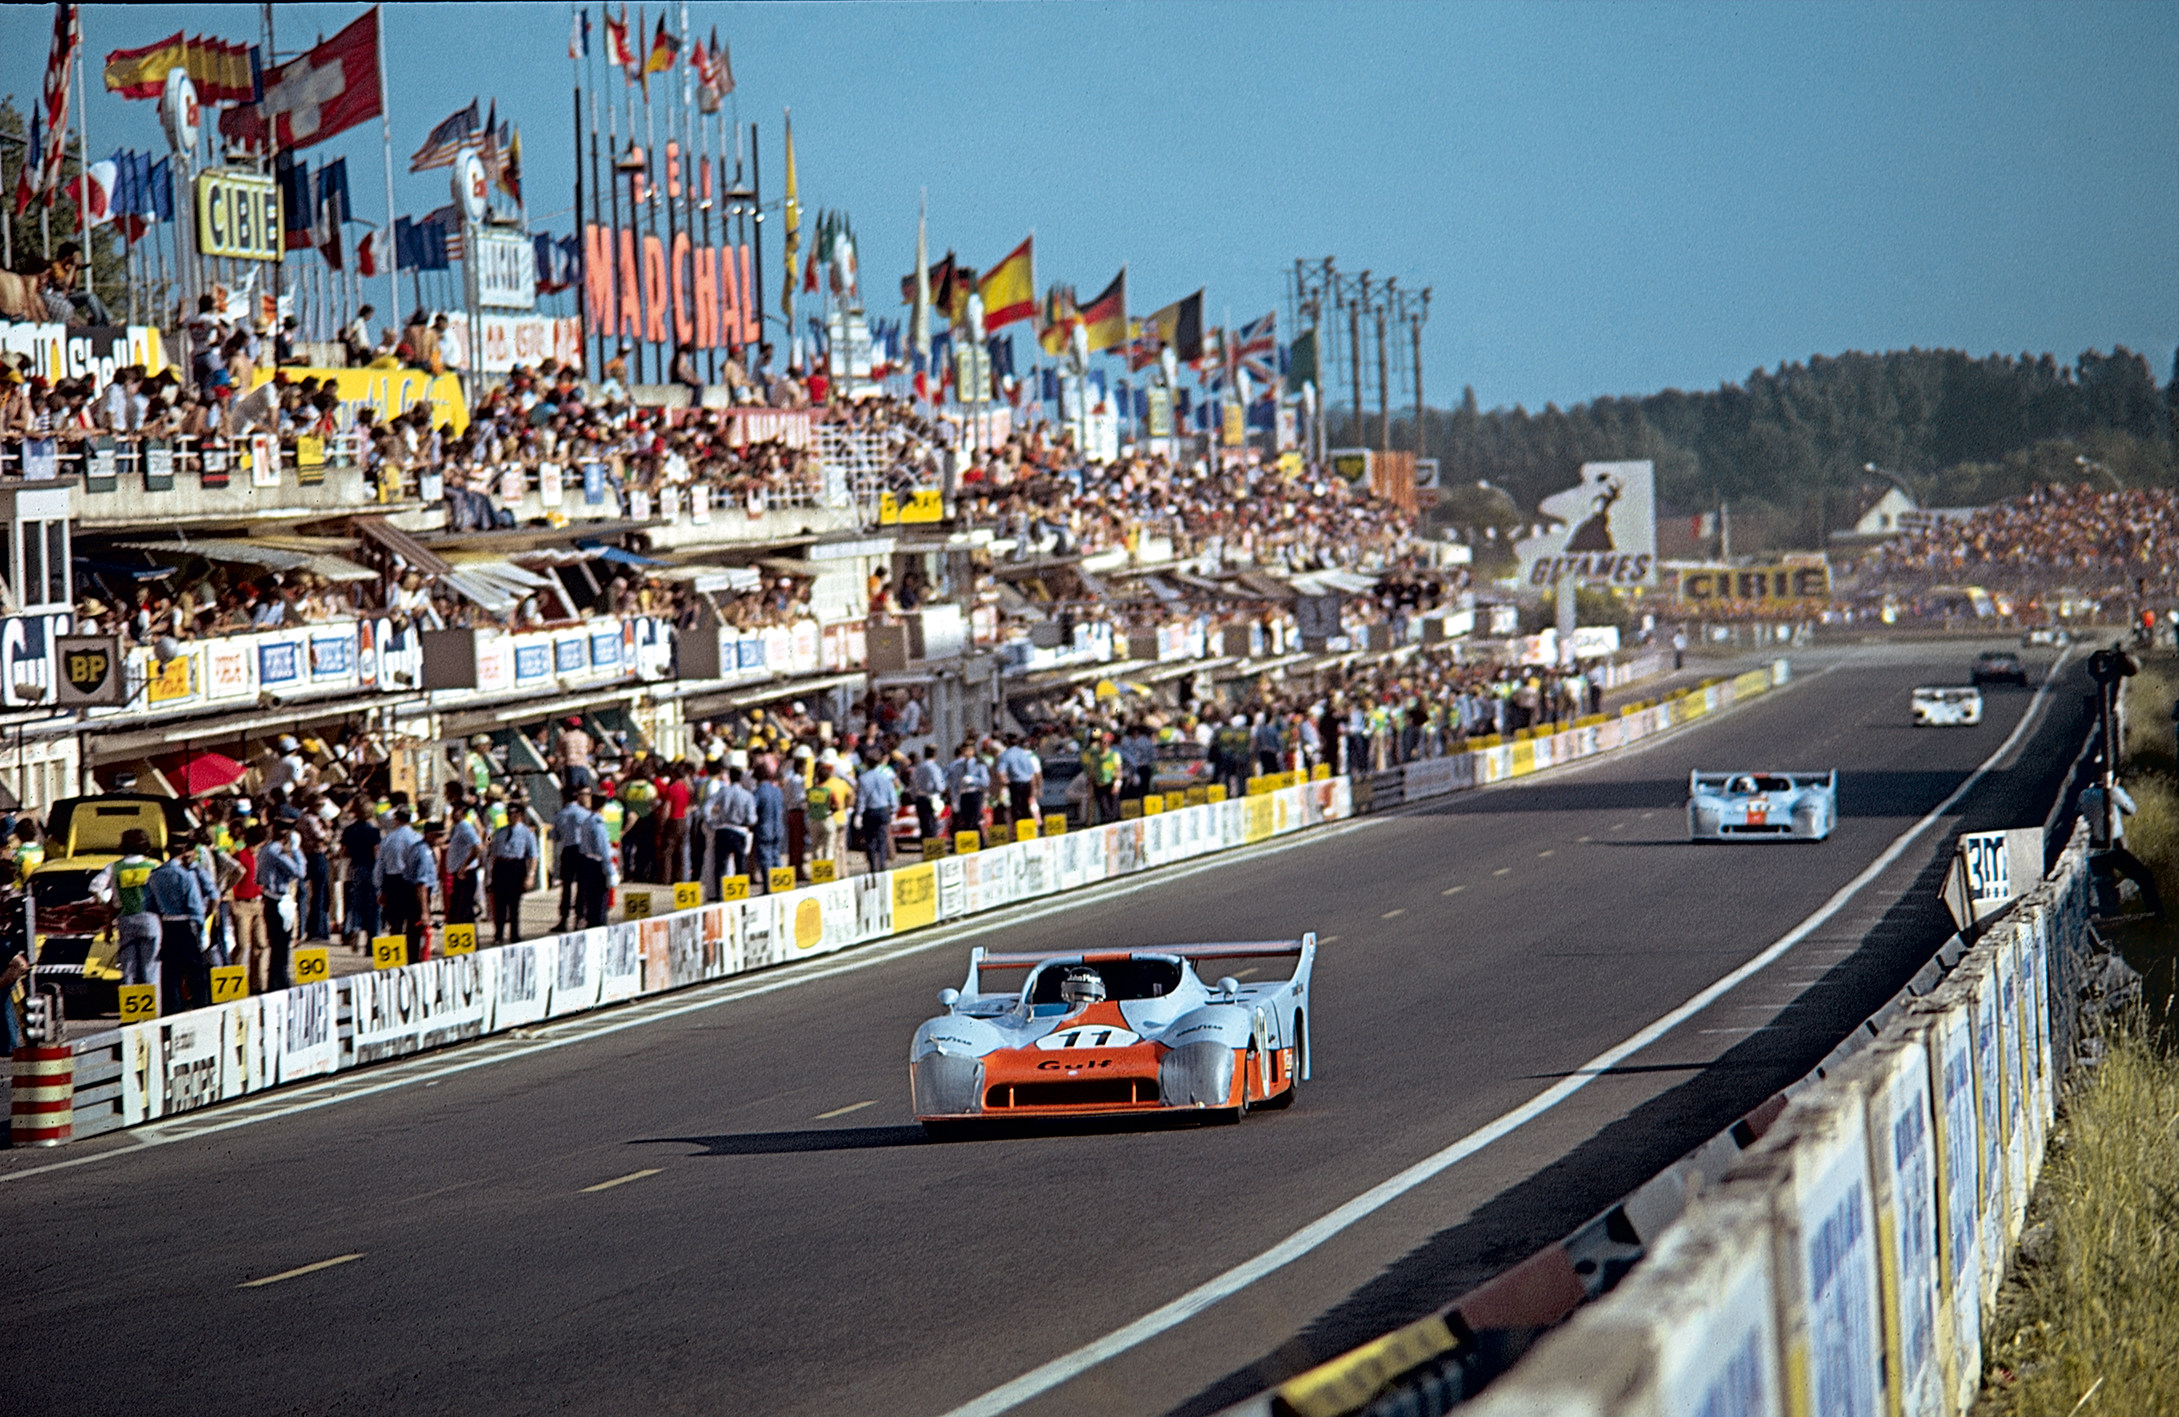 A colourful view of the pits area during the 1975 24 Hours of Le Mans race – a historic endurance event now celebrated in a book marking its centenary. Photo: Handout